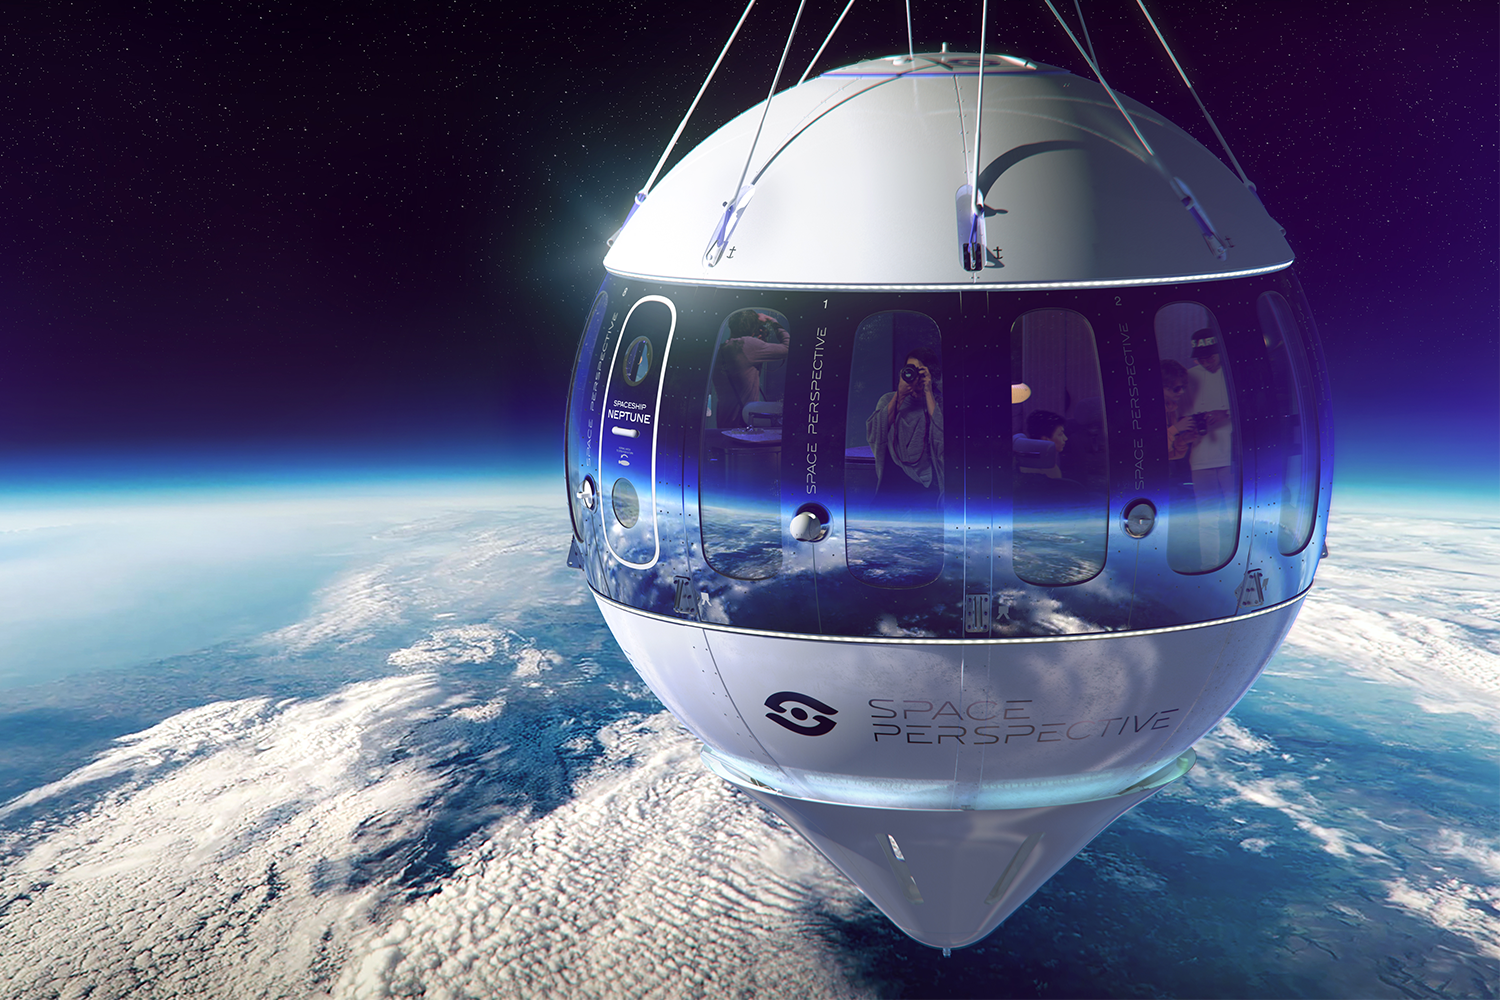 A rendering of the Spaceship Neptune capsule from space tourism company Space Perspective